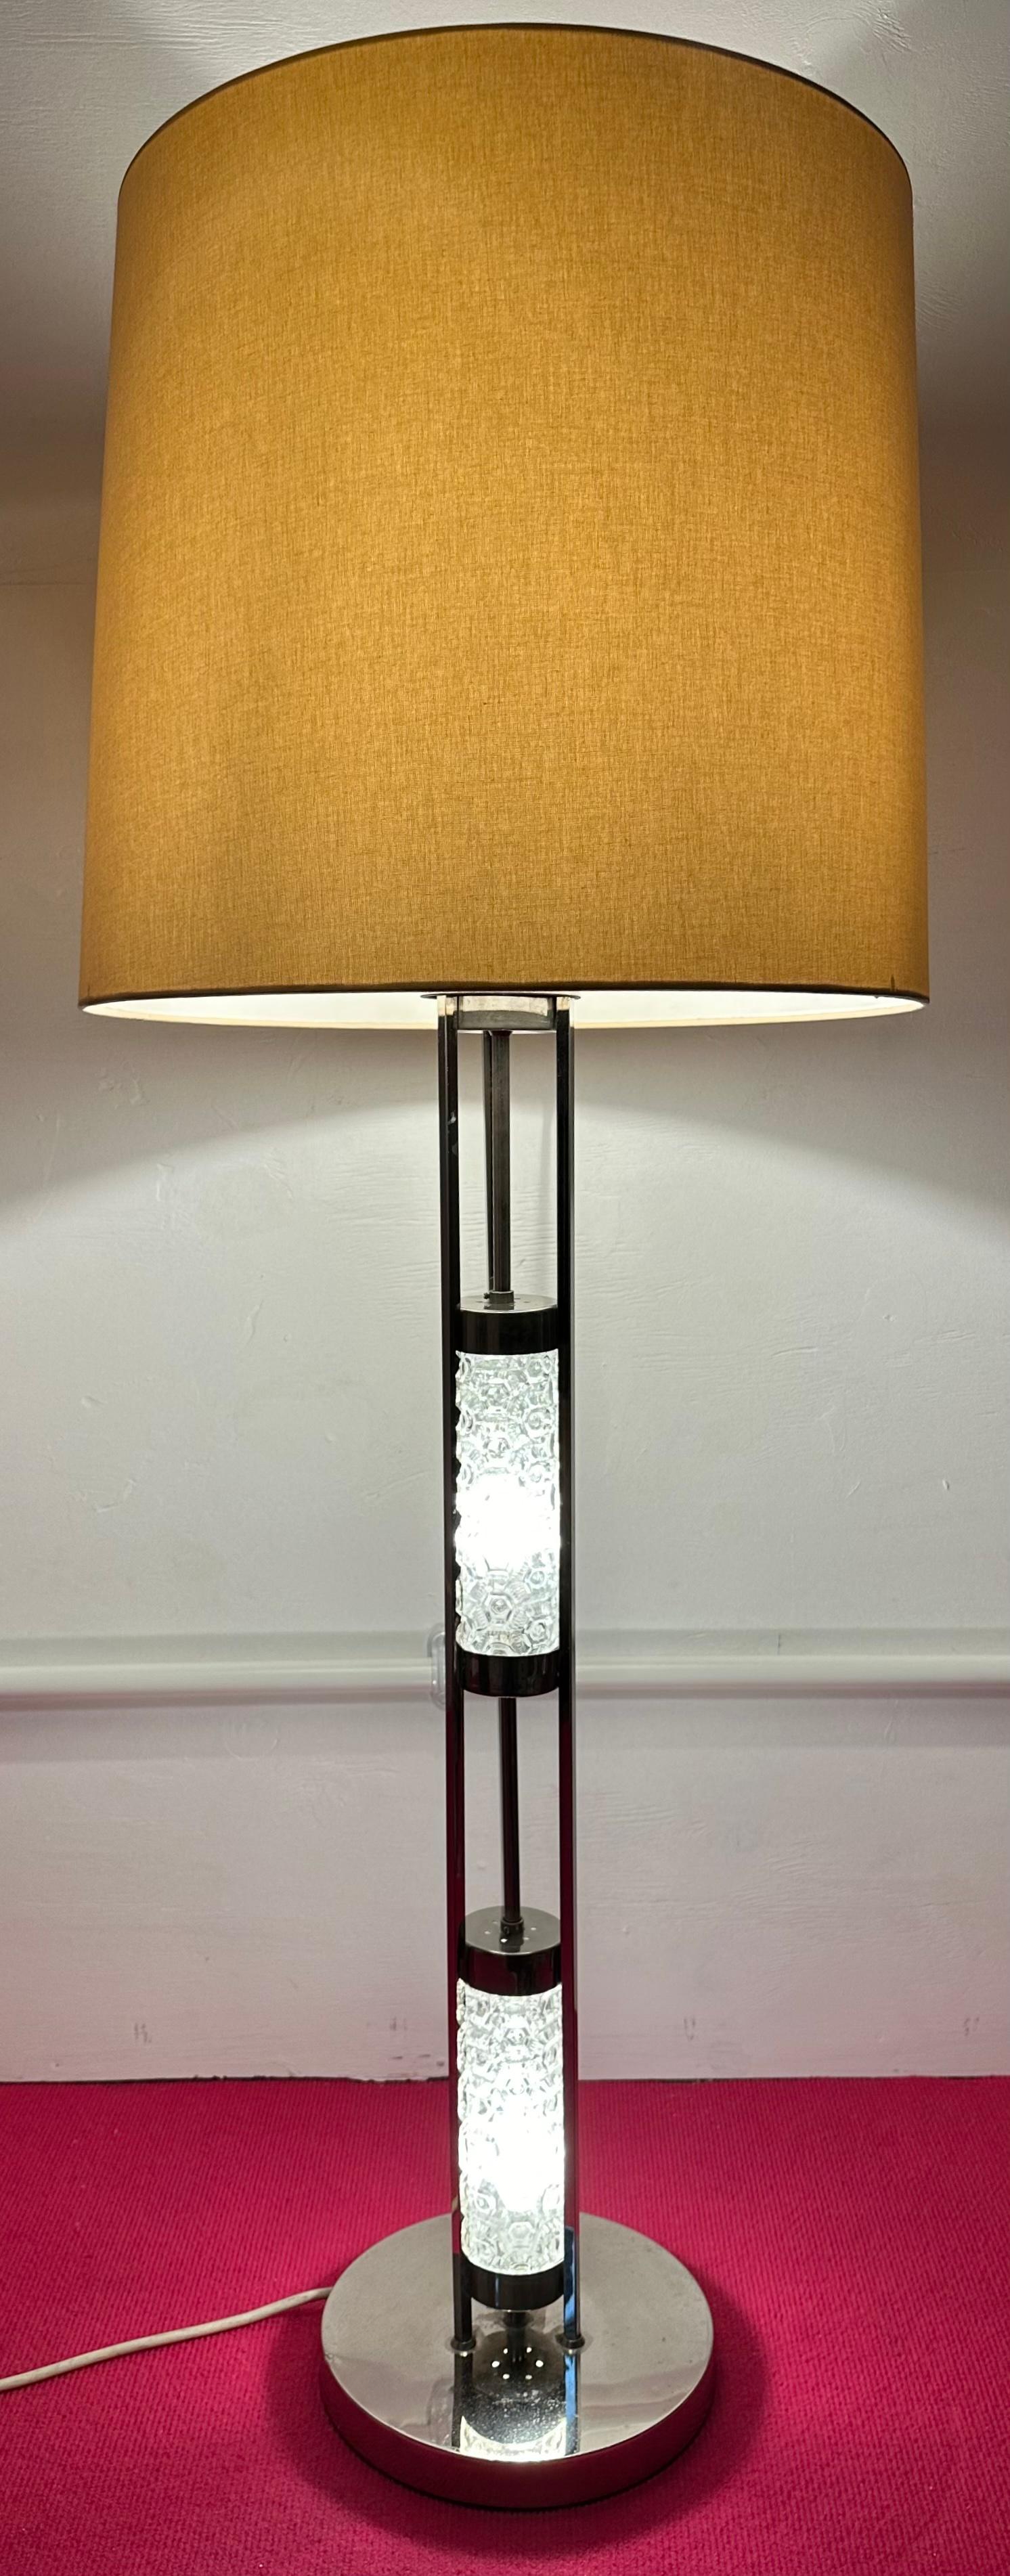 A striking mid century polished chromed-metal and structured abstract glass floor or table lamp designed by Richard Essig for Besigheim in Germany during the 1970s. The lamp stand illuminates in two sections which are separated by a chrome ring and